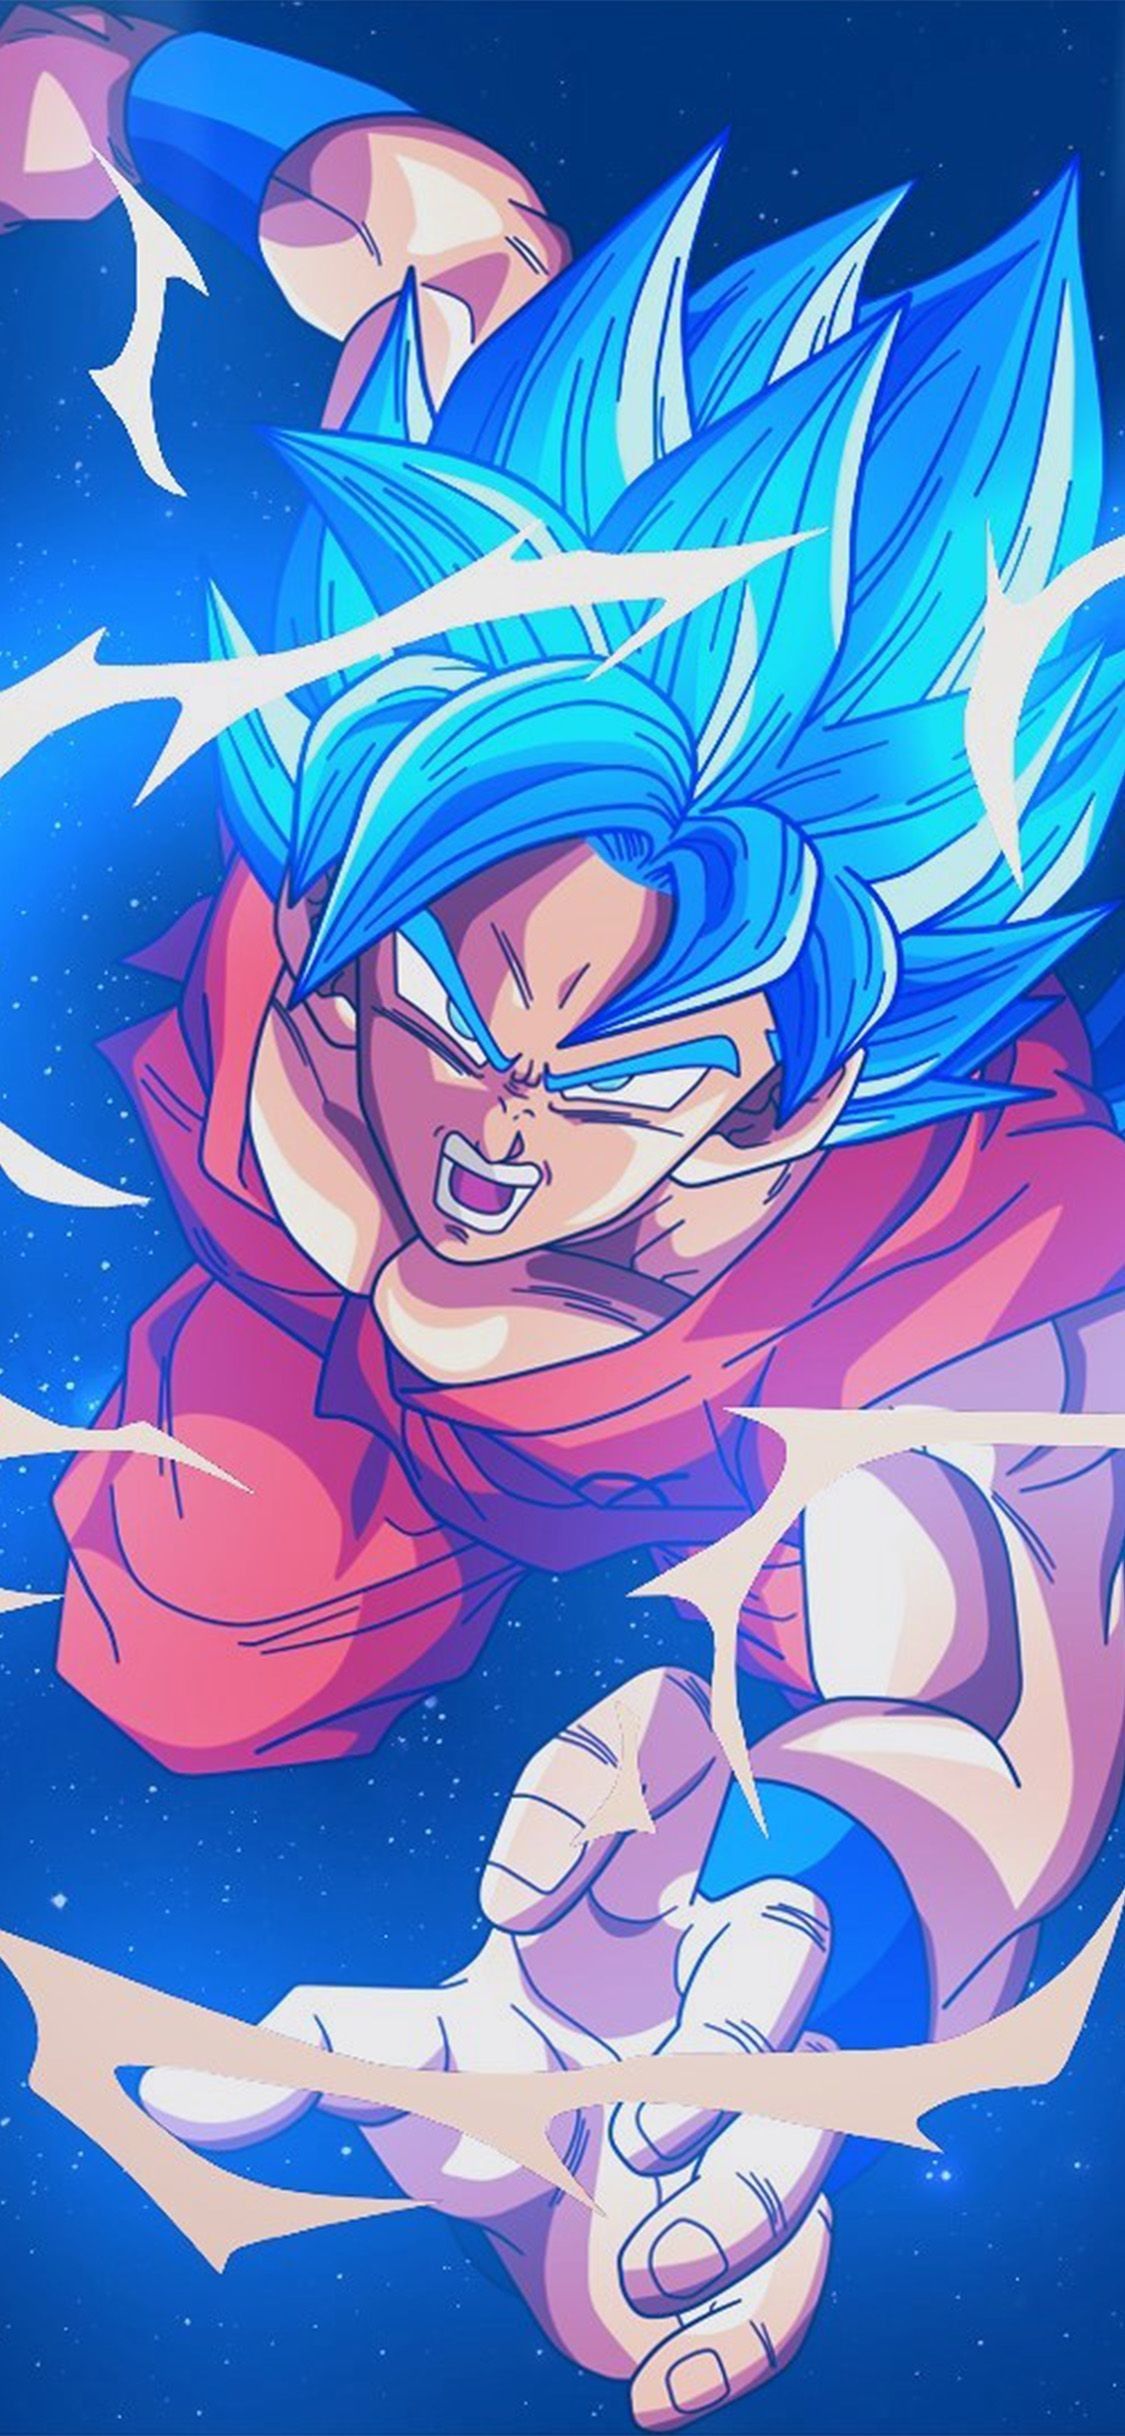 Download Dragon Ball Z wallpapers for iPhone in 2023 - iGeeksBlog  Dragon  ball z iphone wallpaper, Dragon ball super wallpapers, Dragon ball artwork